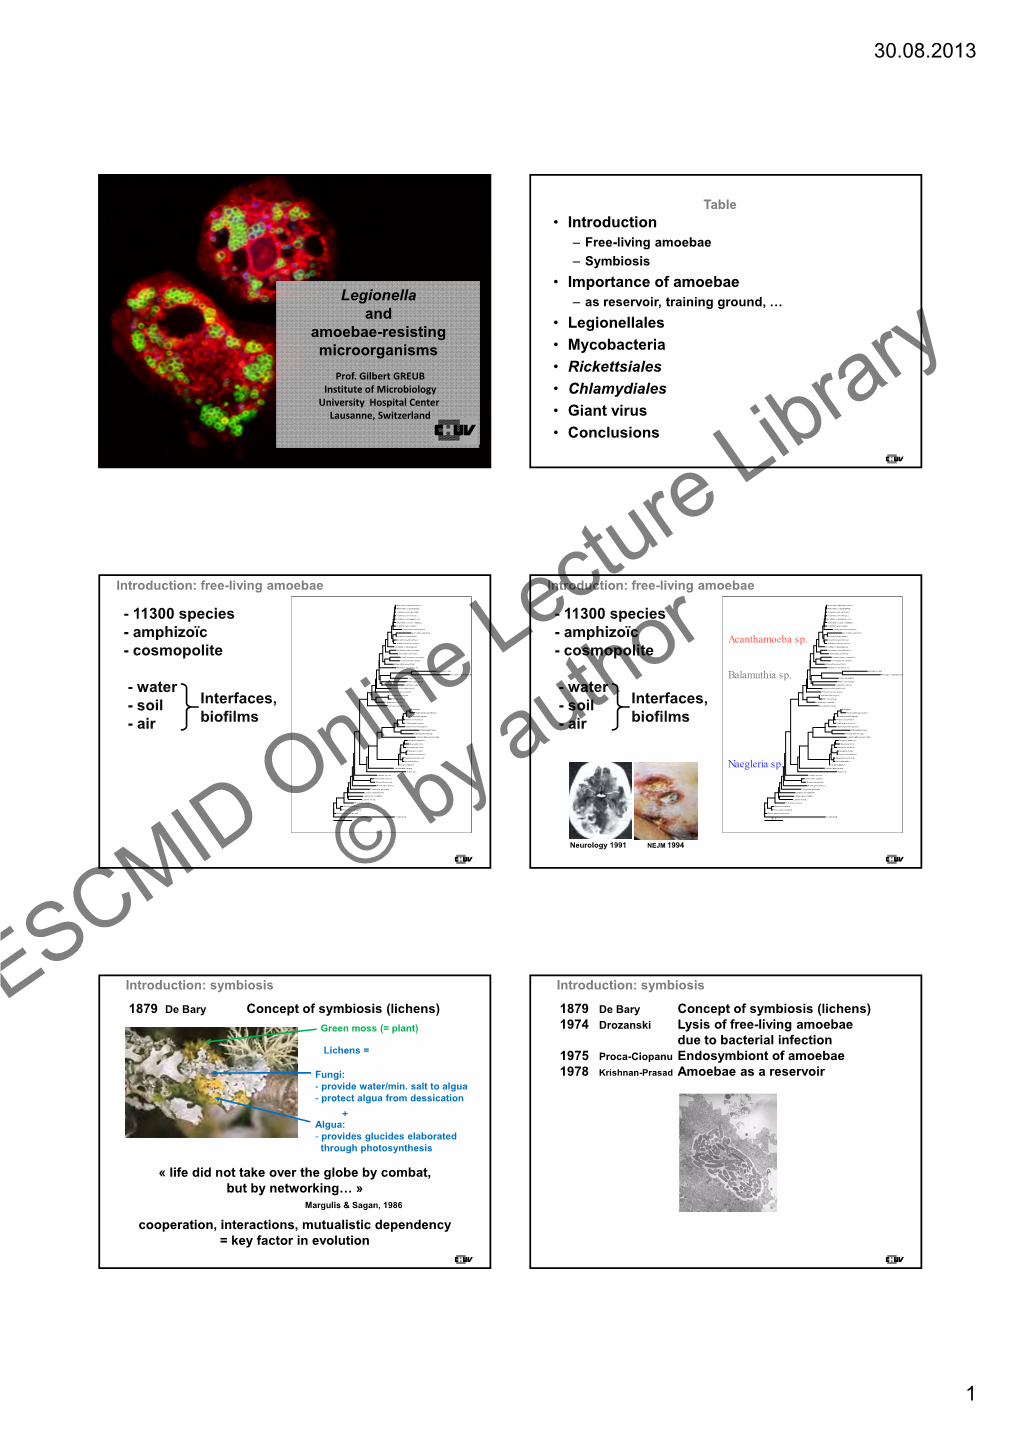 ESCMID Online Lecture Library © by Author